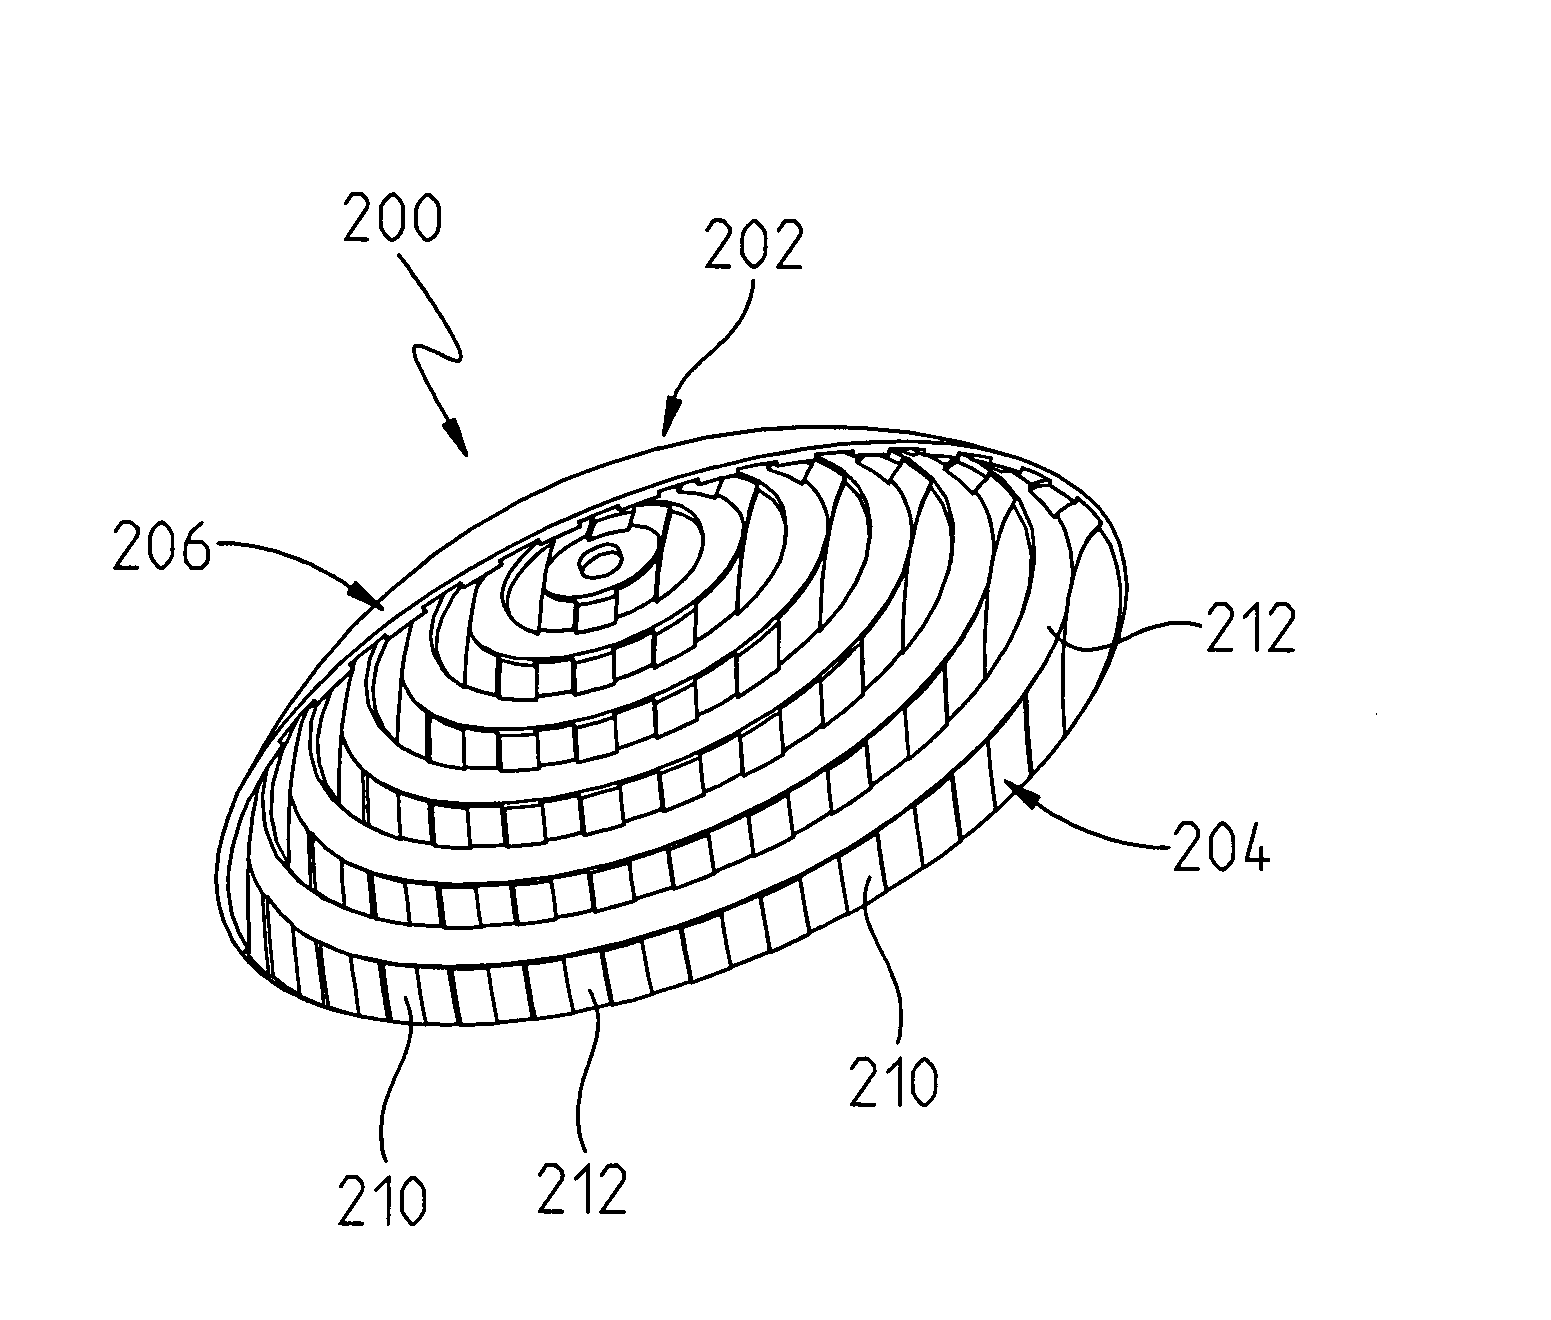 Contact lens materials, designs, substances, and methods